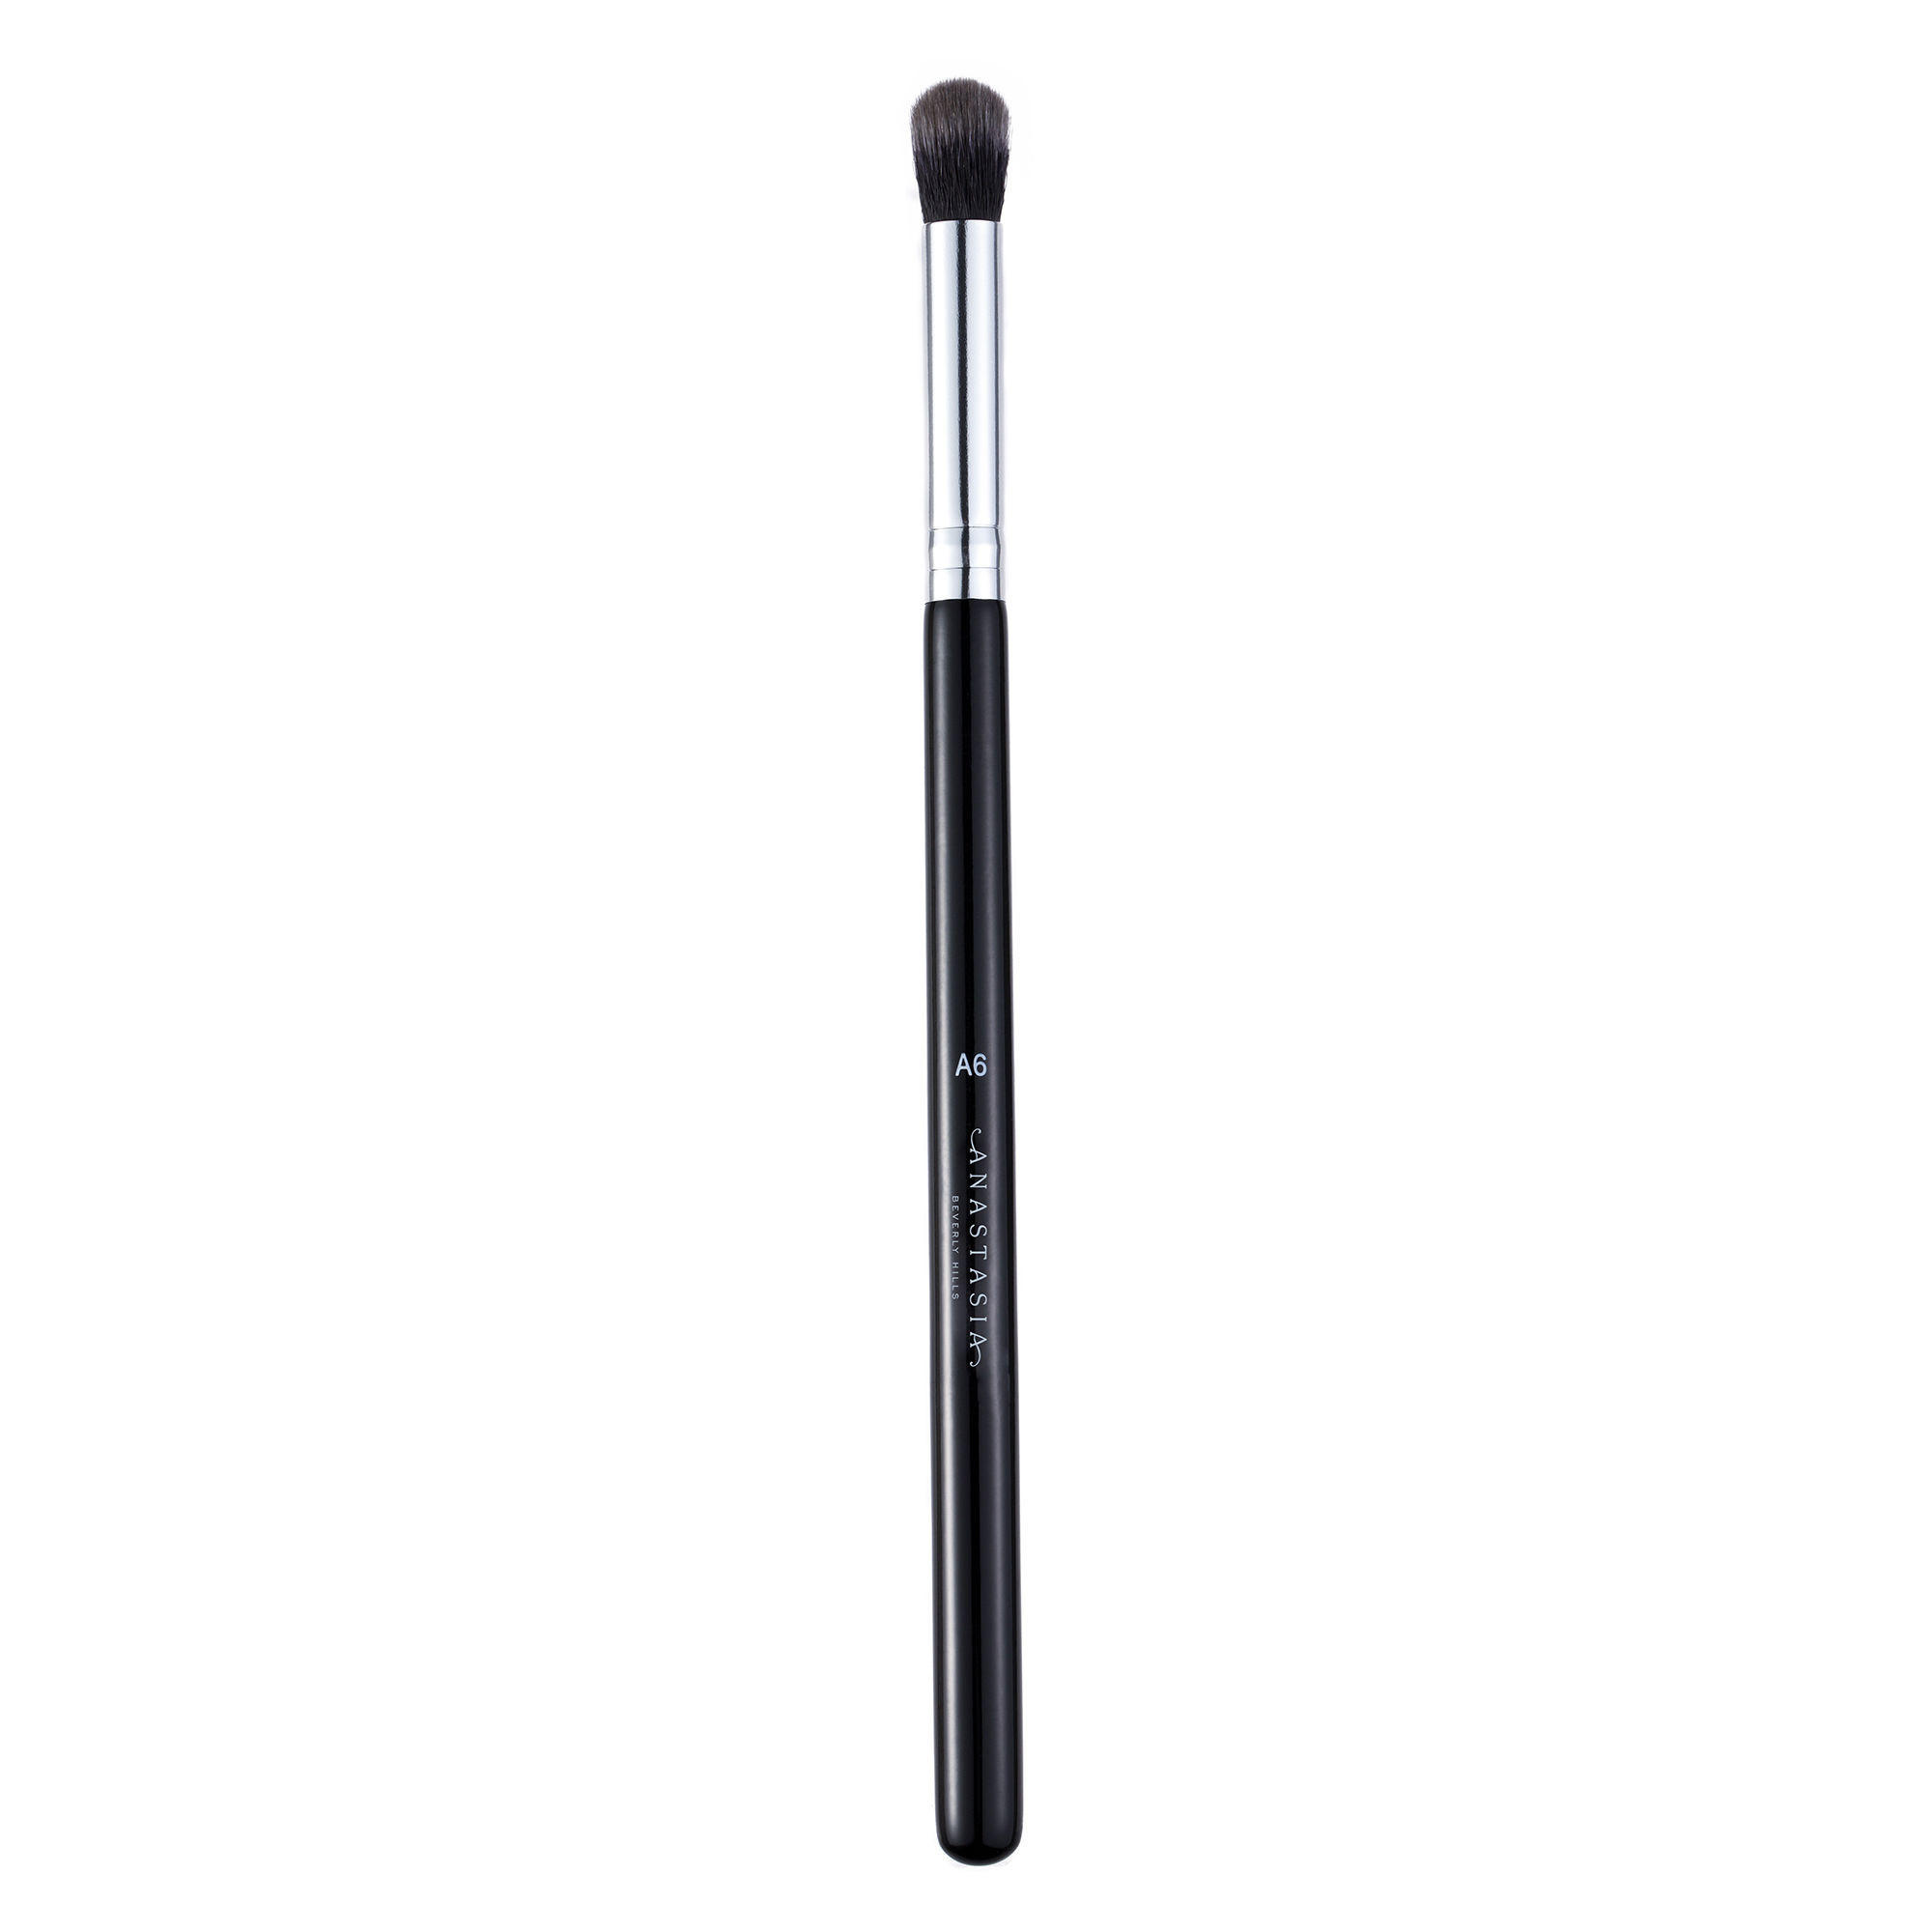 Anastasia Pro Buff And Blend Brush A6